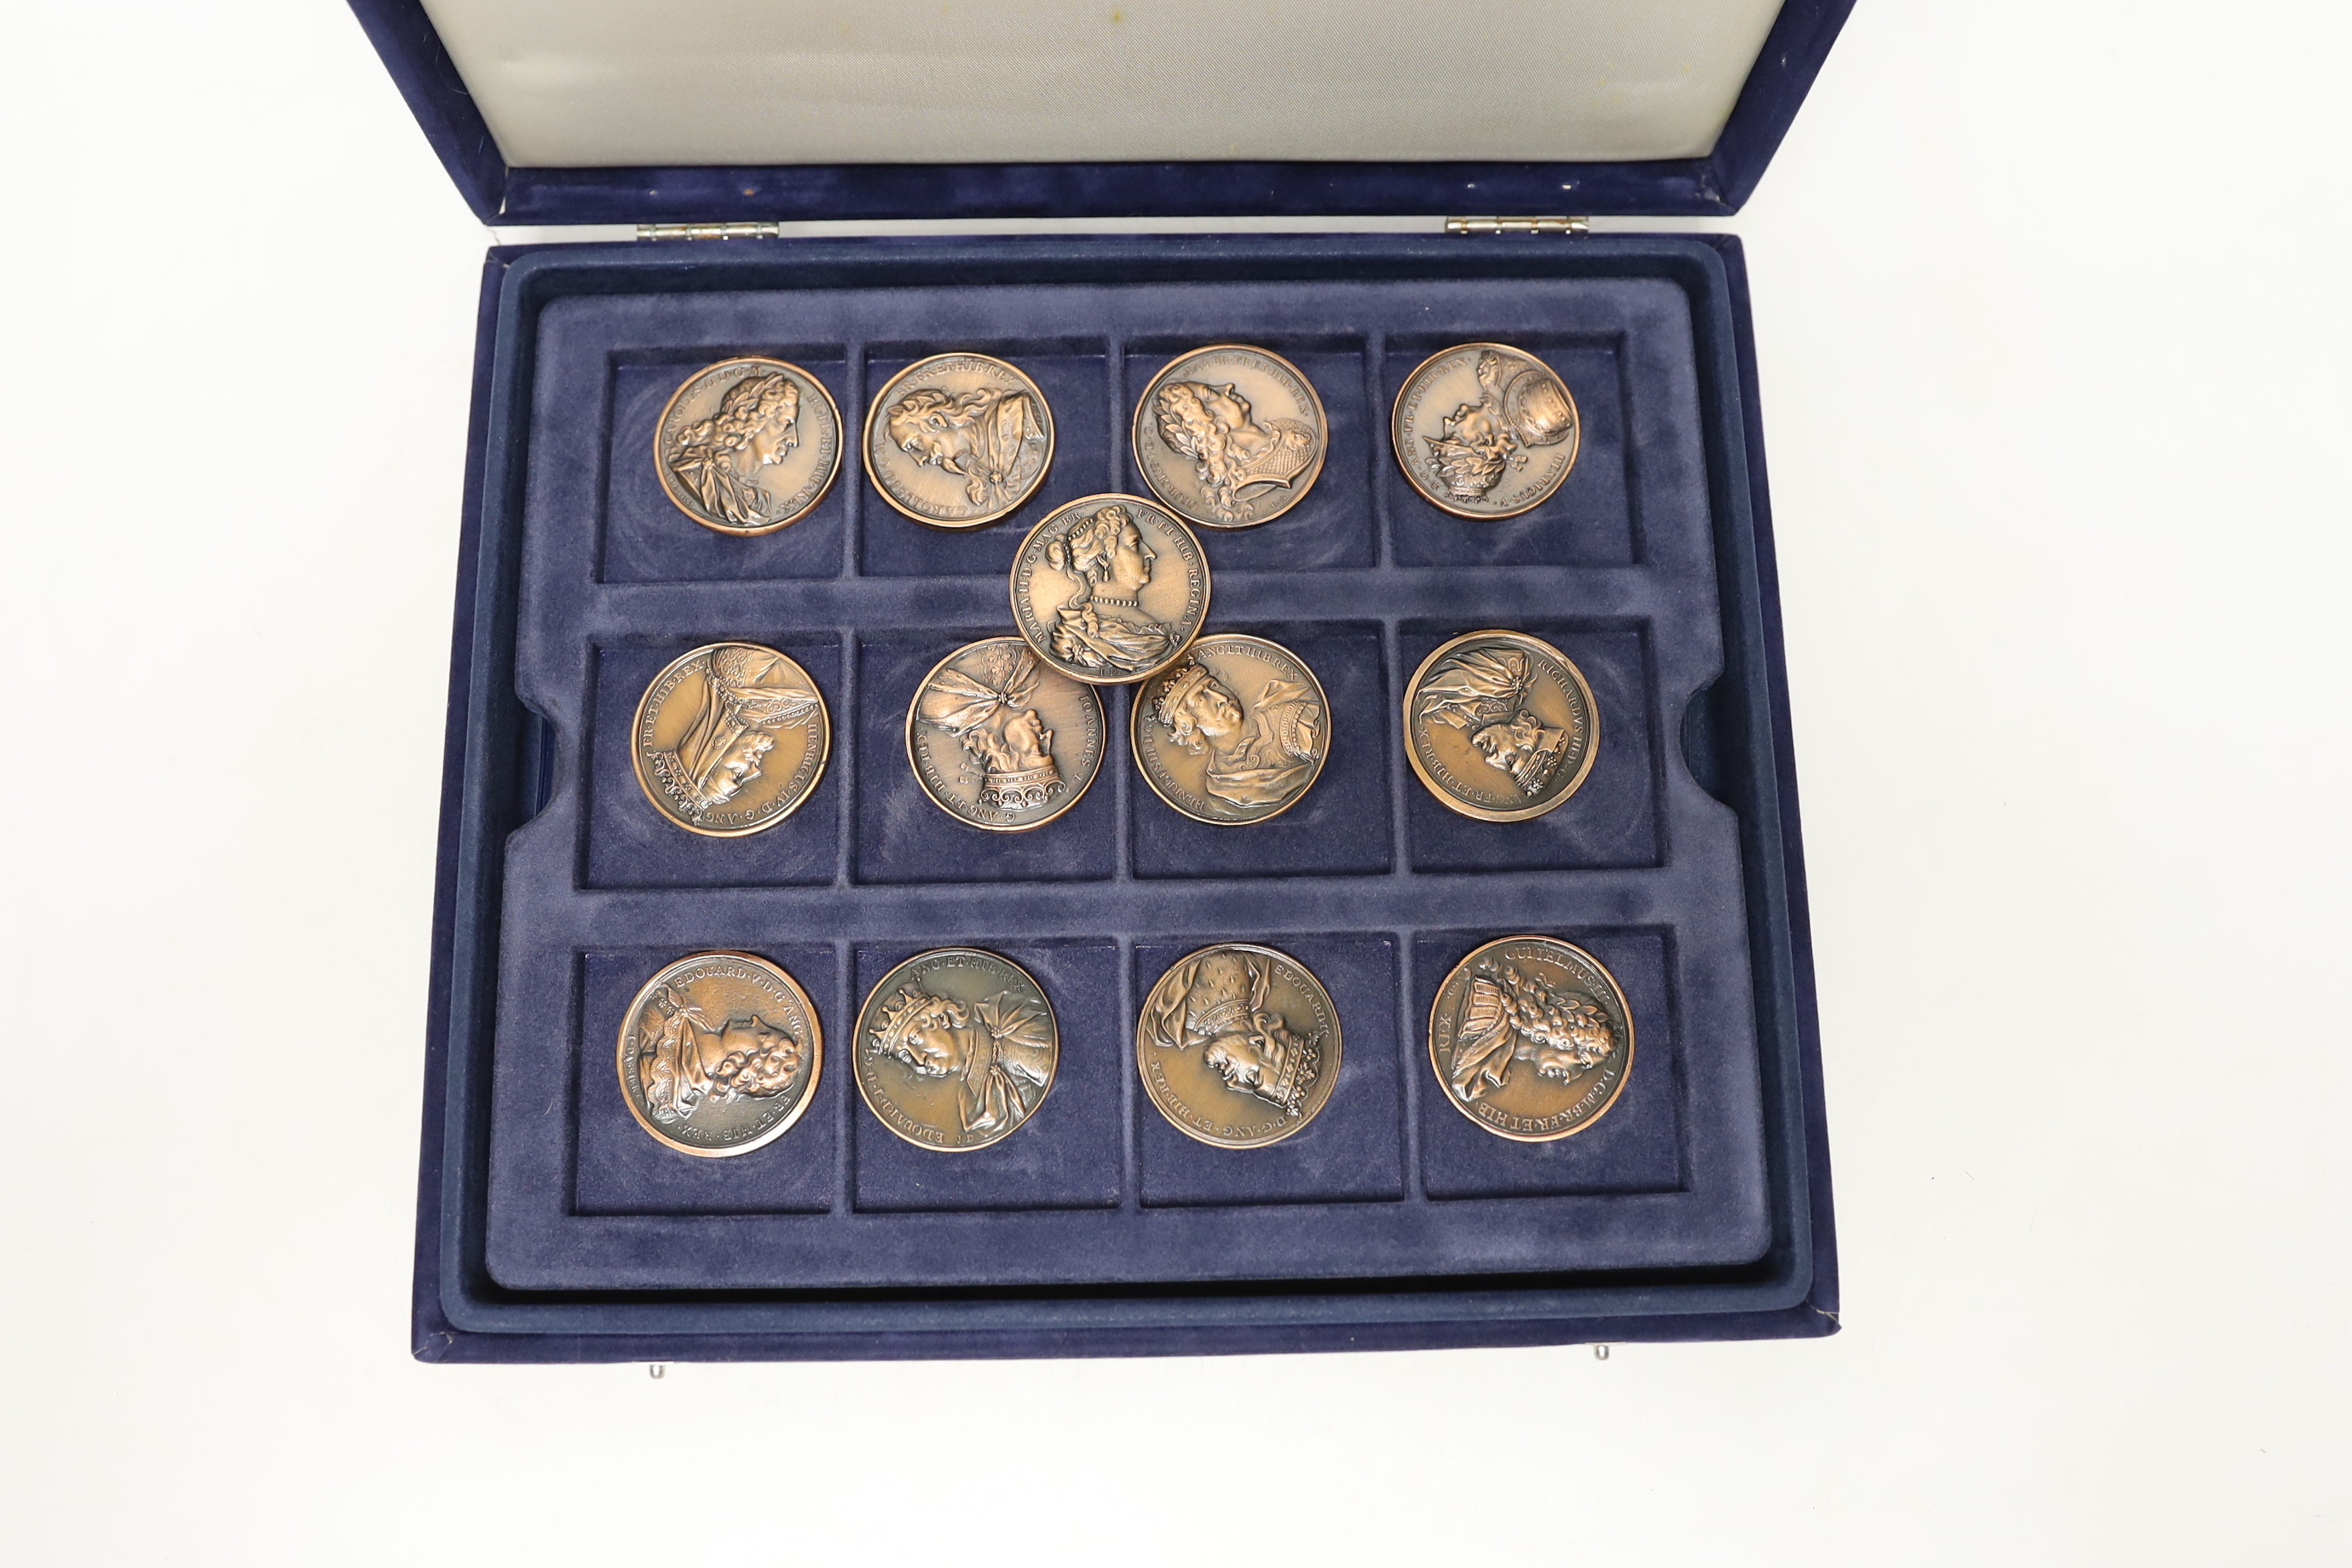 A cased set of Westminster Jean Dassier Collection AE Commemorative Monarchs of Britain medals.